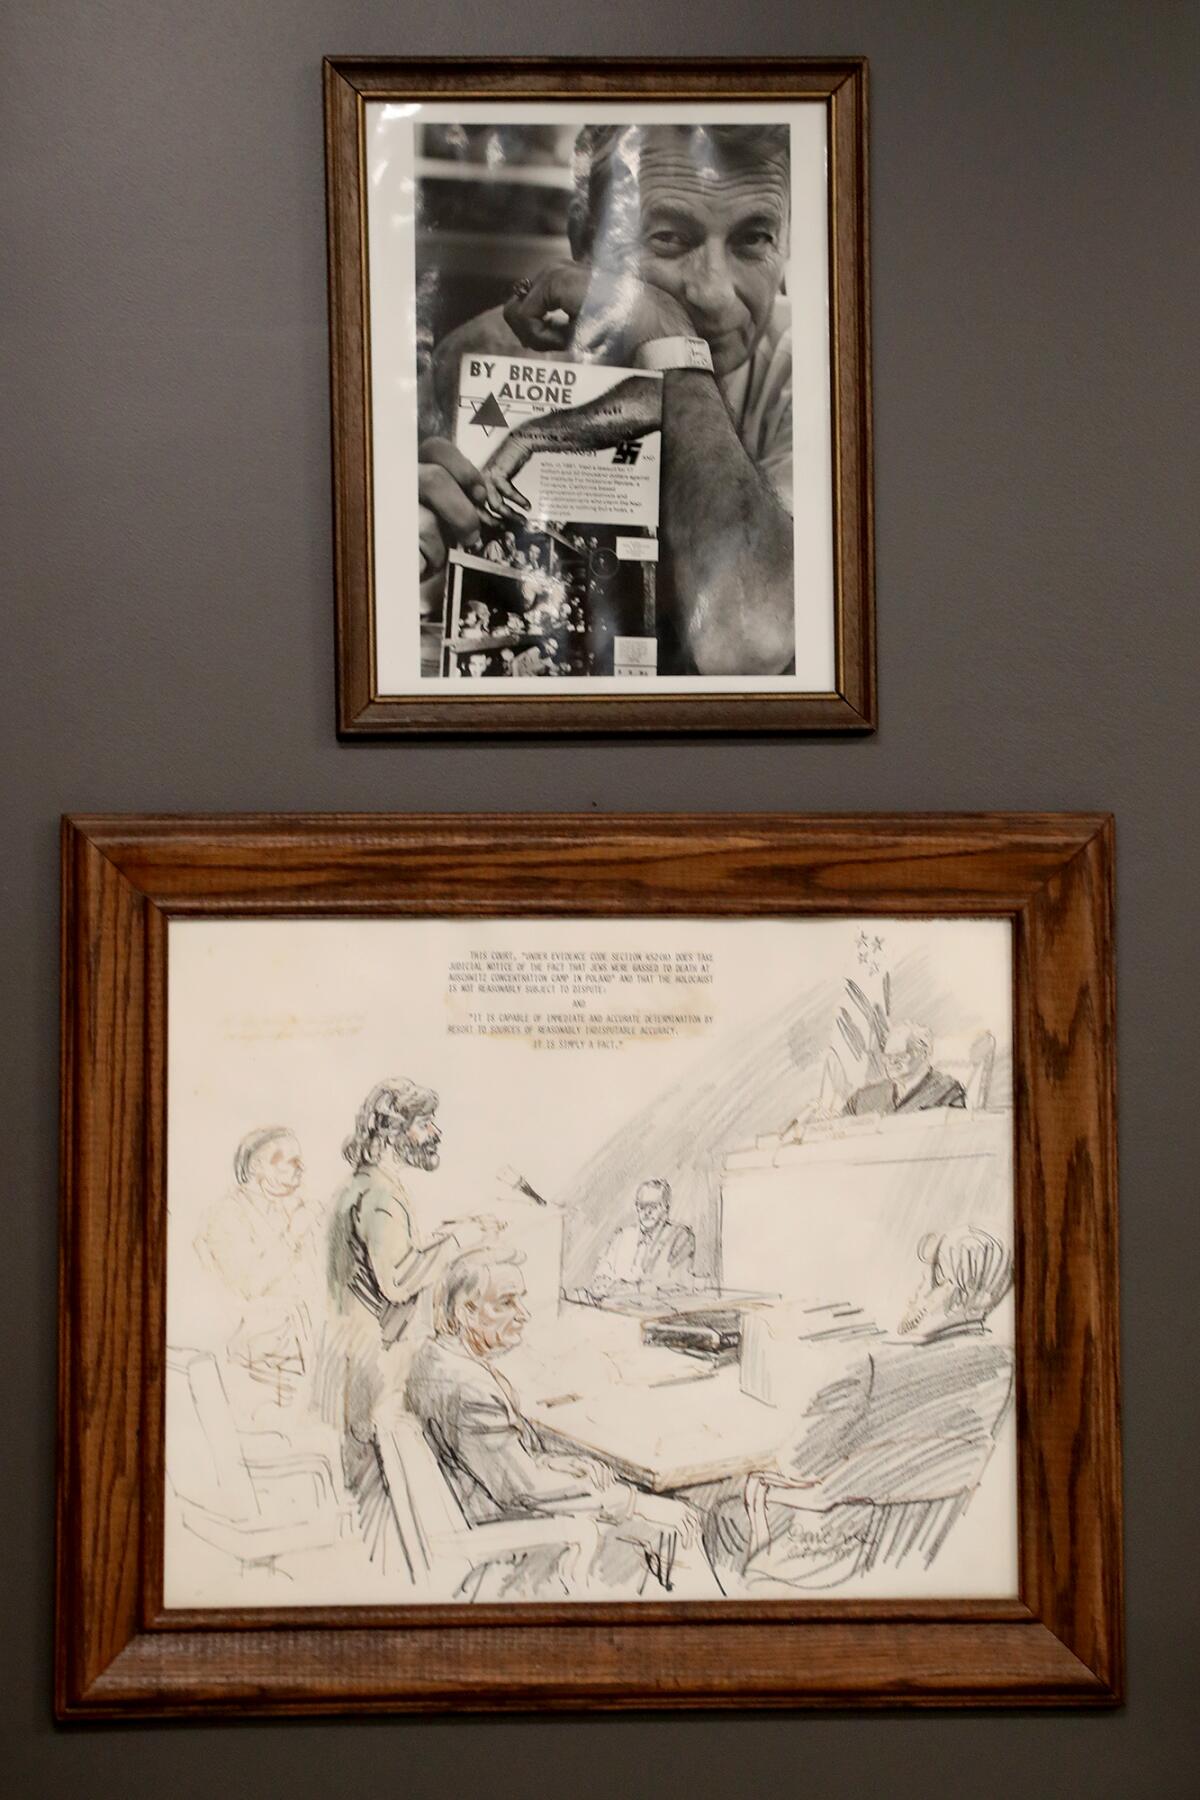 A picture of holocaust survivor Mel Mermelstein above a sketch of holocaust deniers in an exhibition at the Chabad Center.